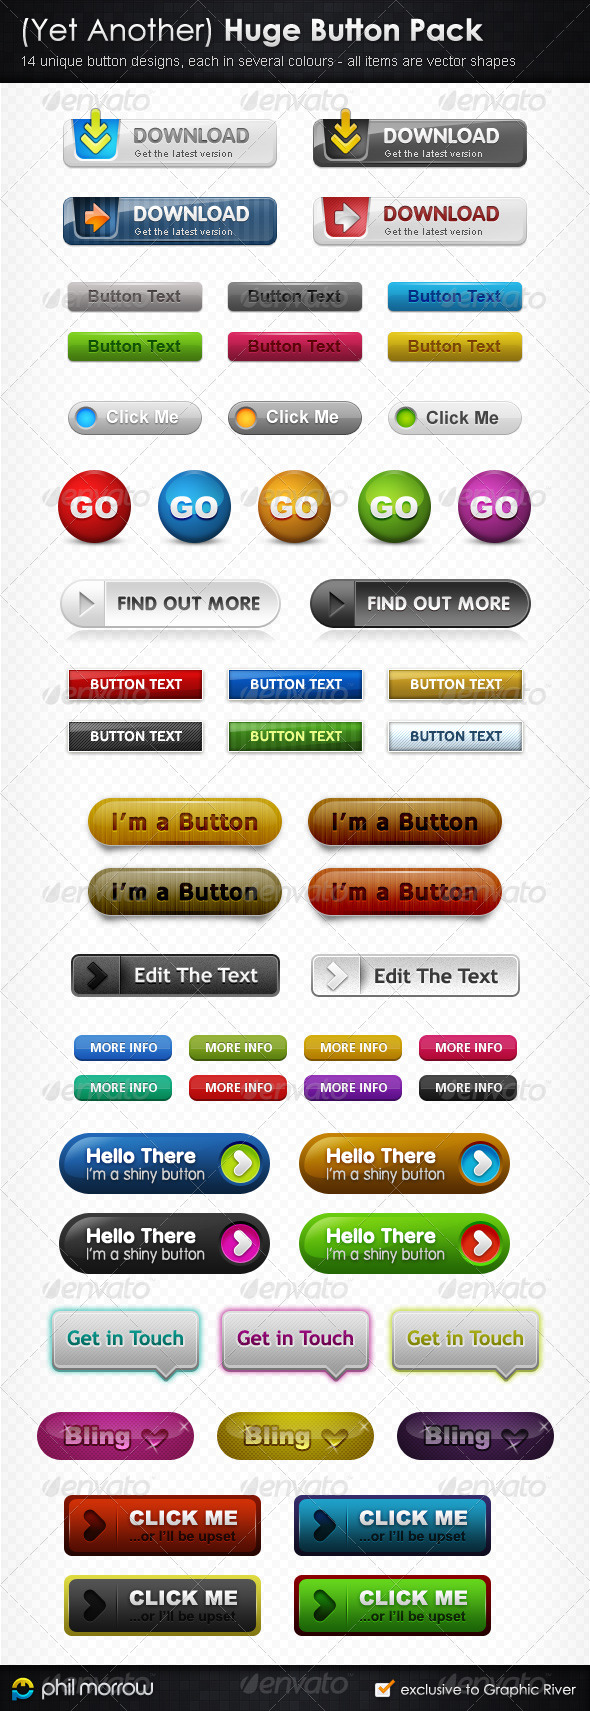 (Yet Another) Huge Button Pack - GraphicRiver Item for Sale